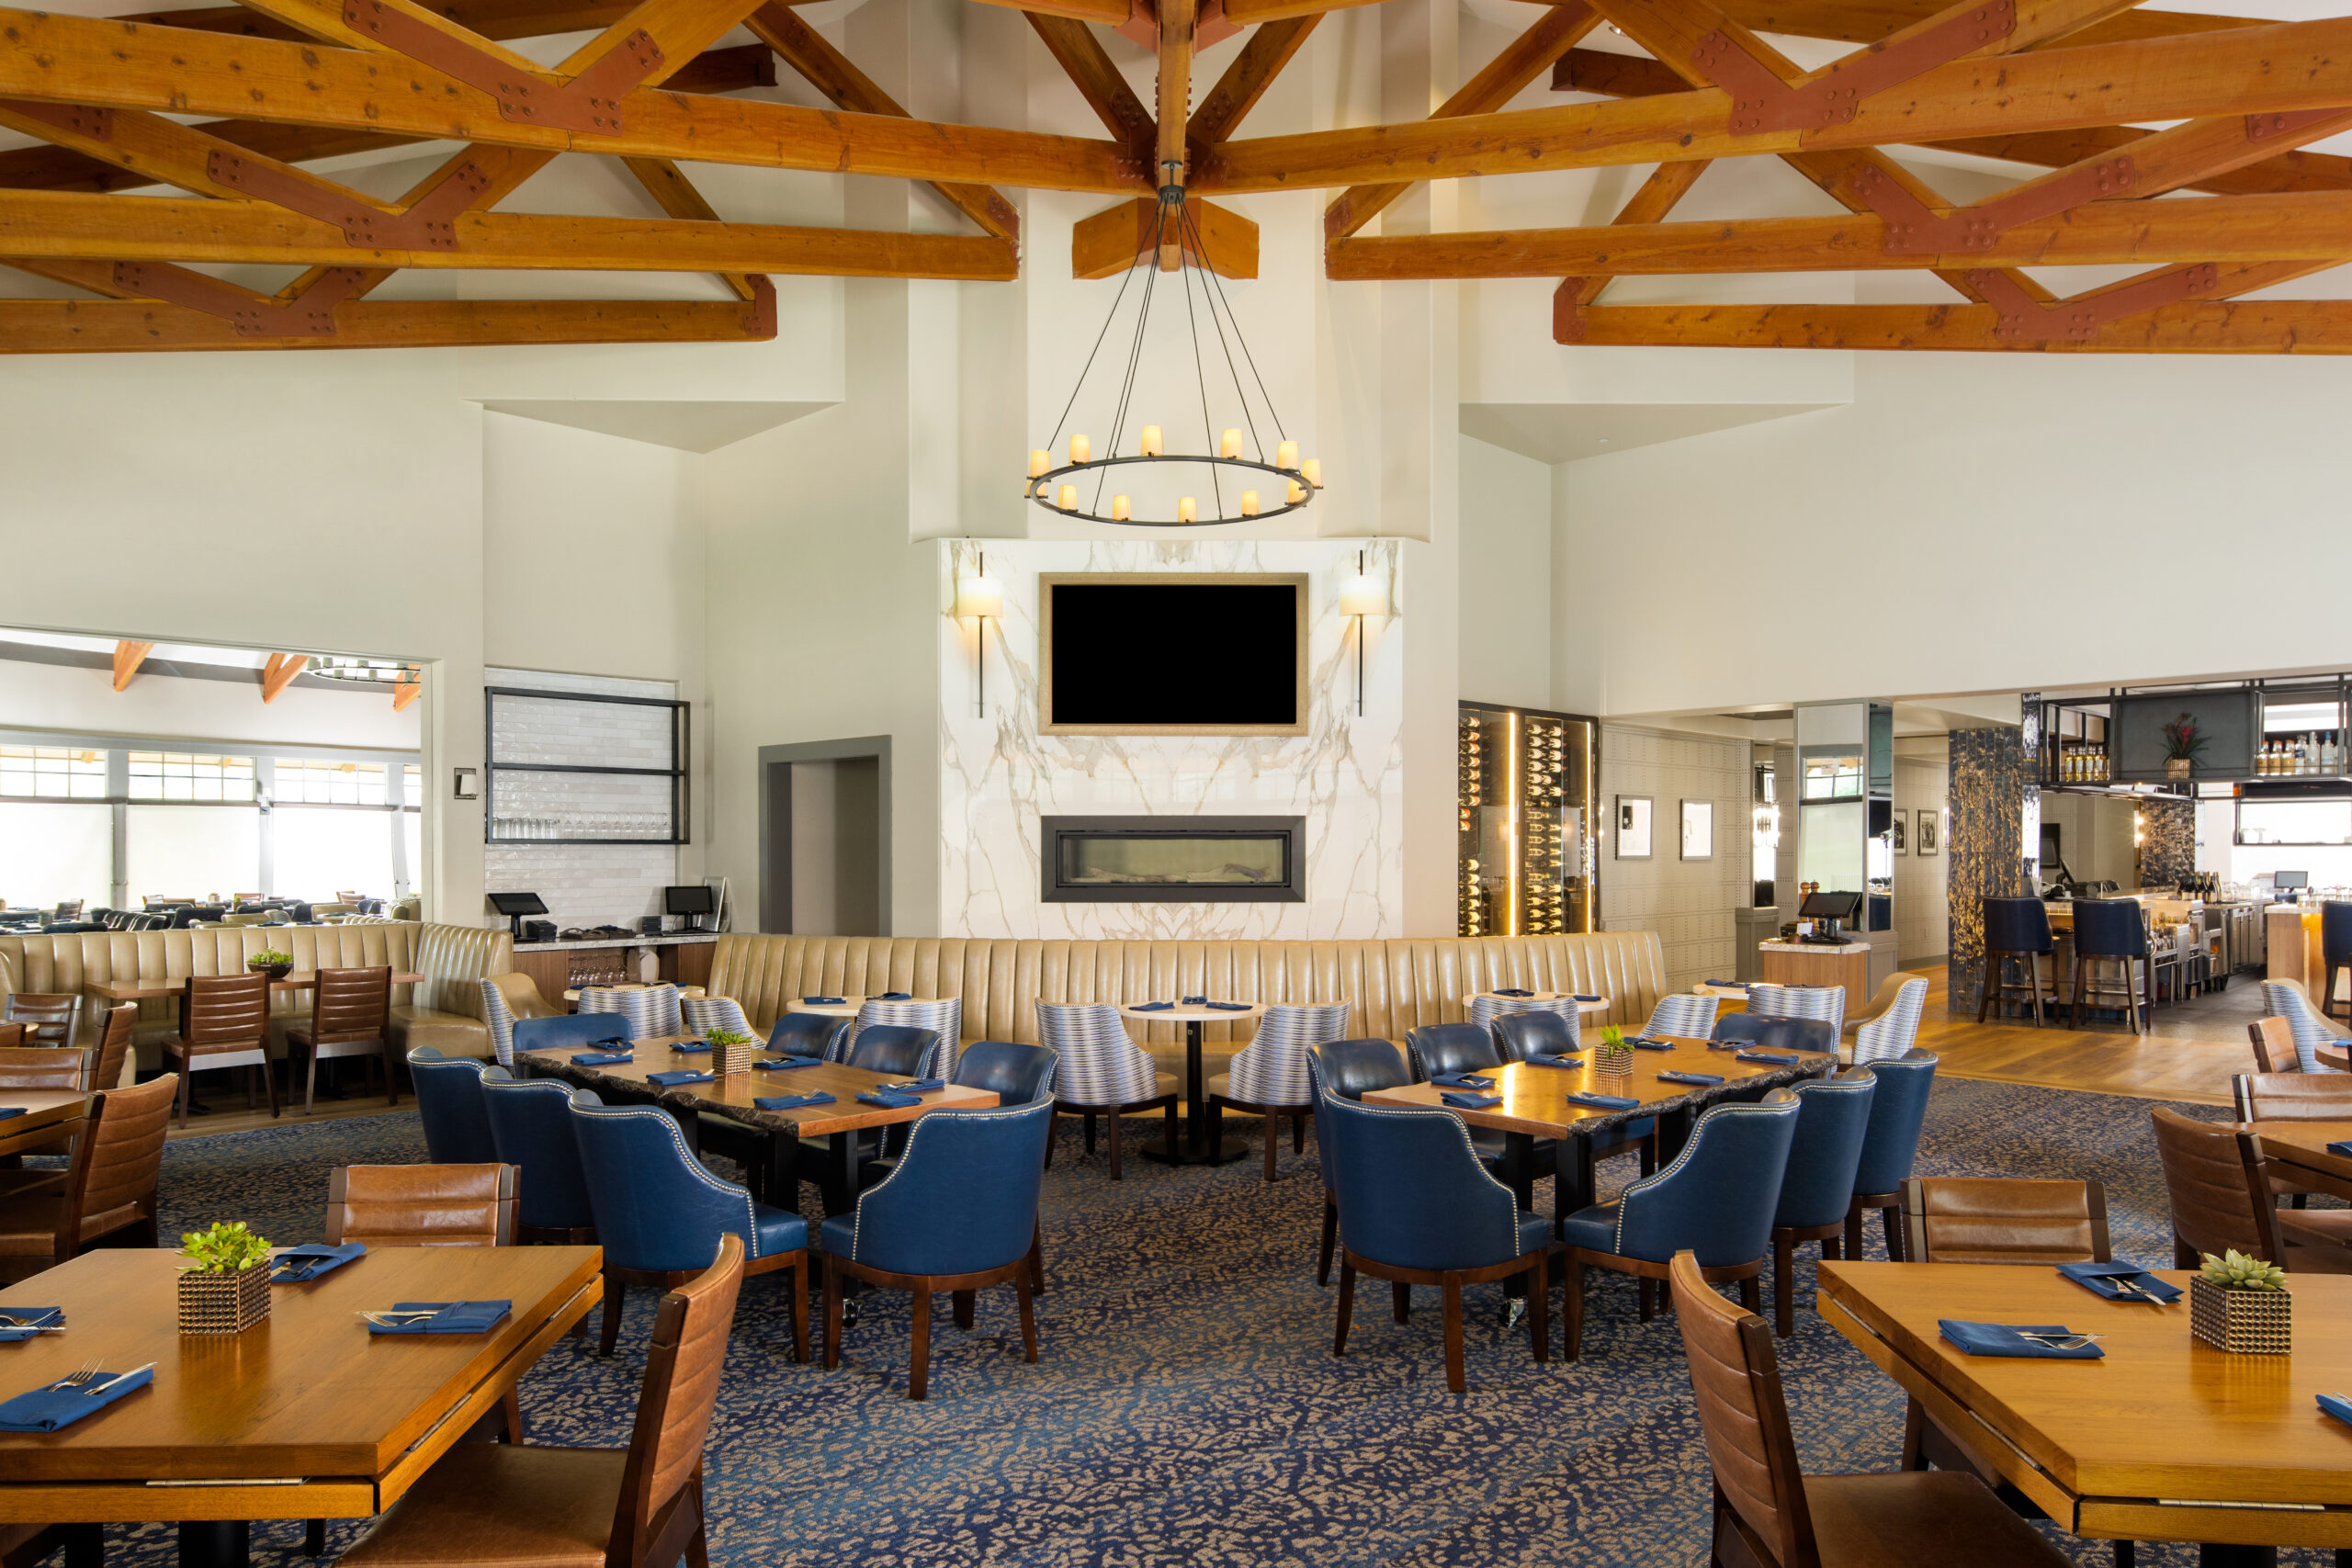 Upscale country club bar and restaurant interior design and furniture, seating area with fireplace, blue chairs, wood beams, booths